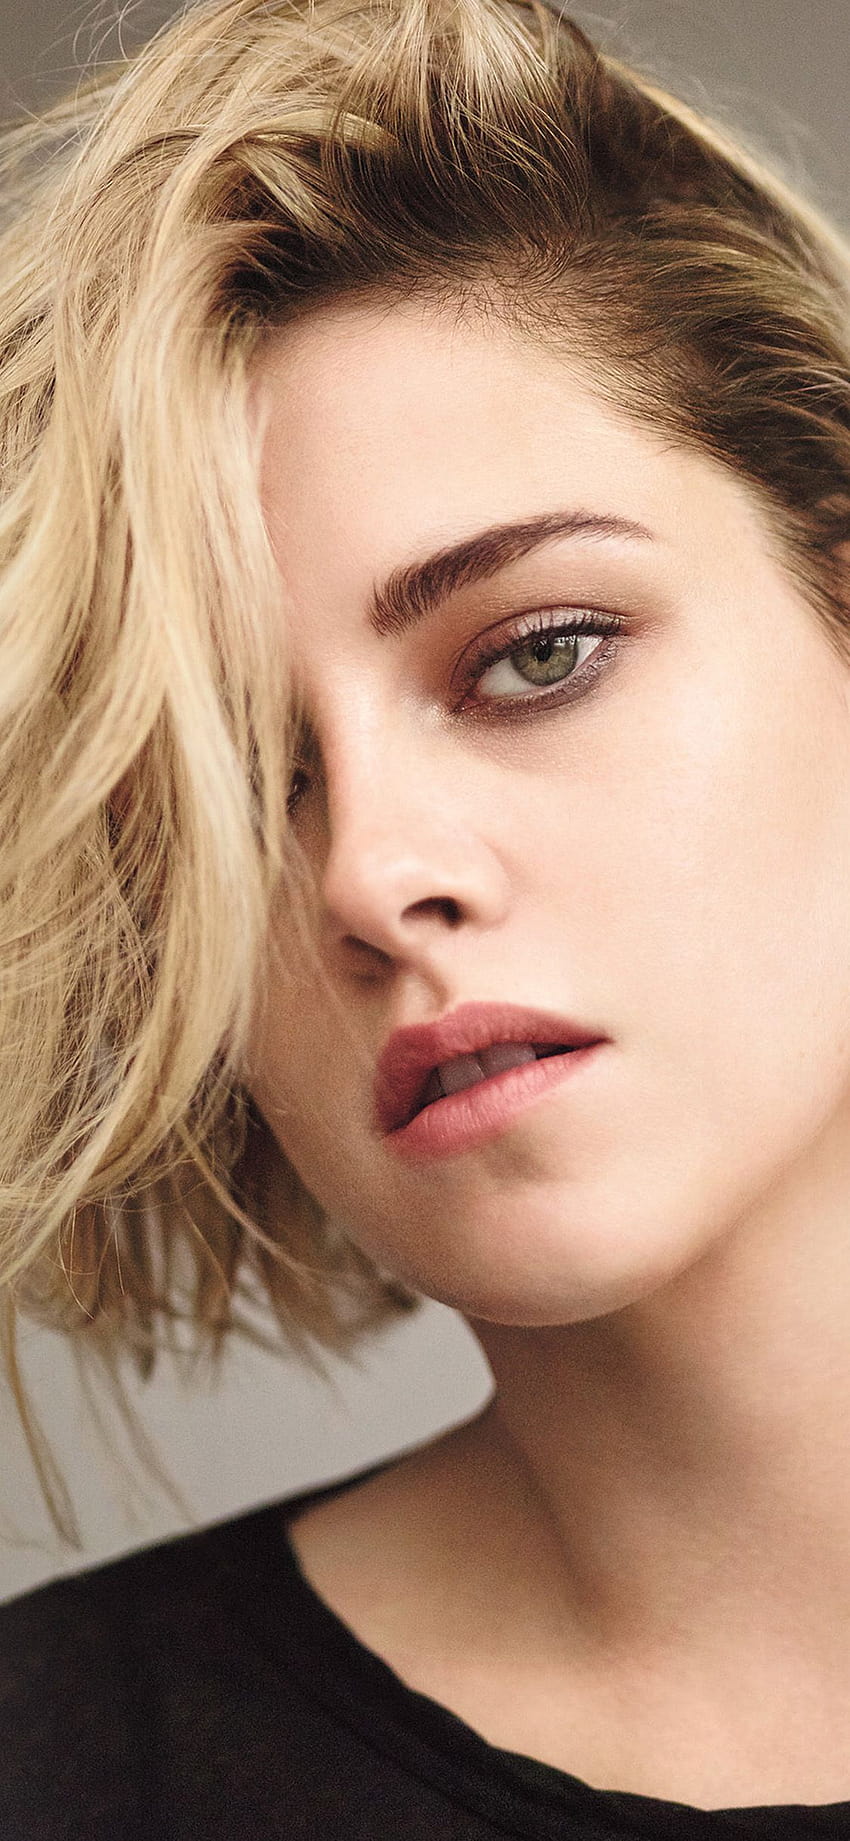 Kristen Stewart is unrecognisable with dramatic new blonde buzzcut